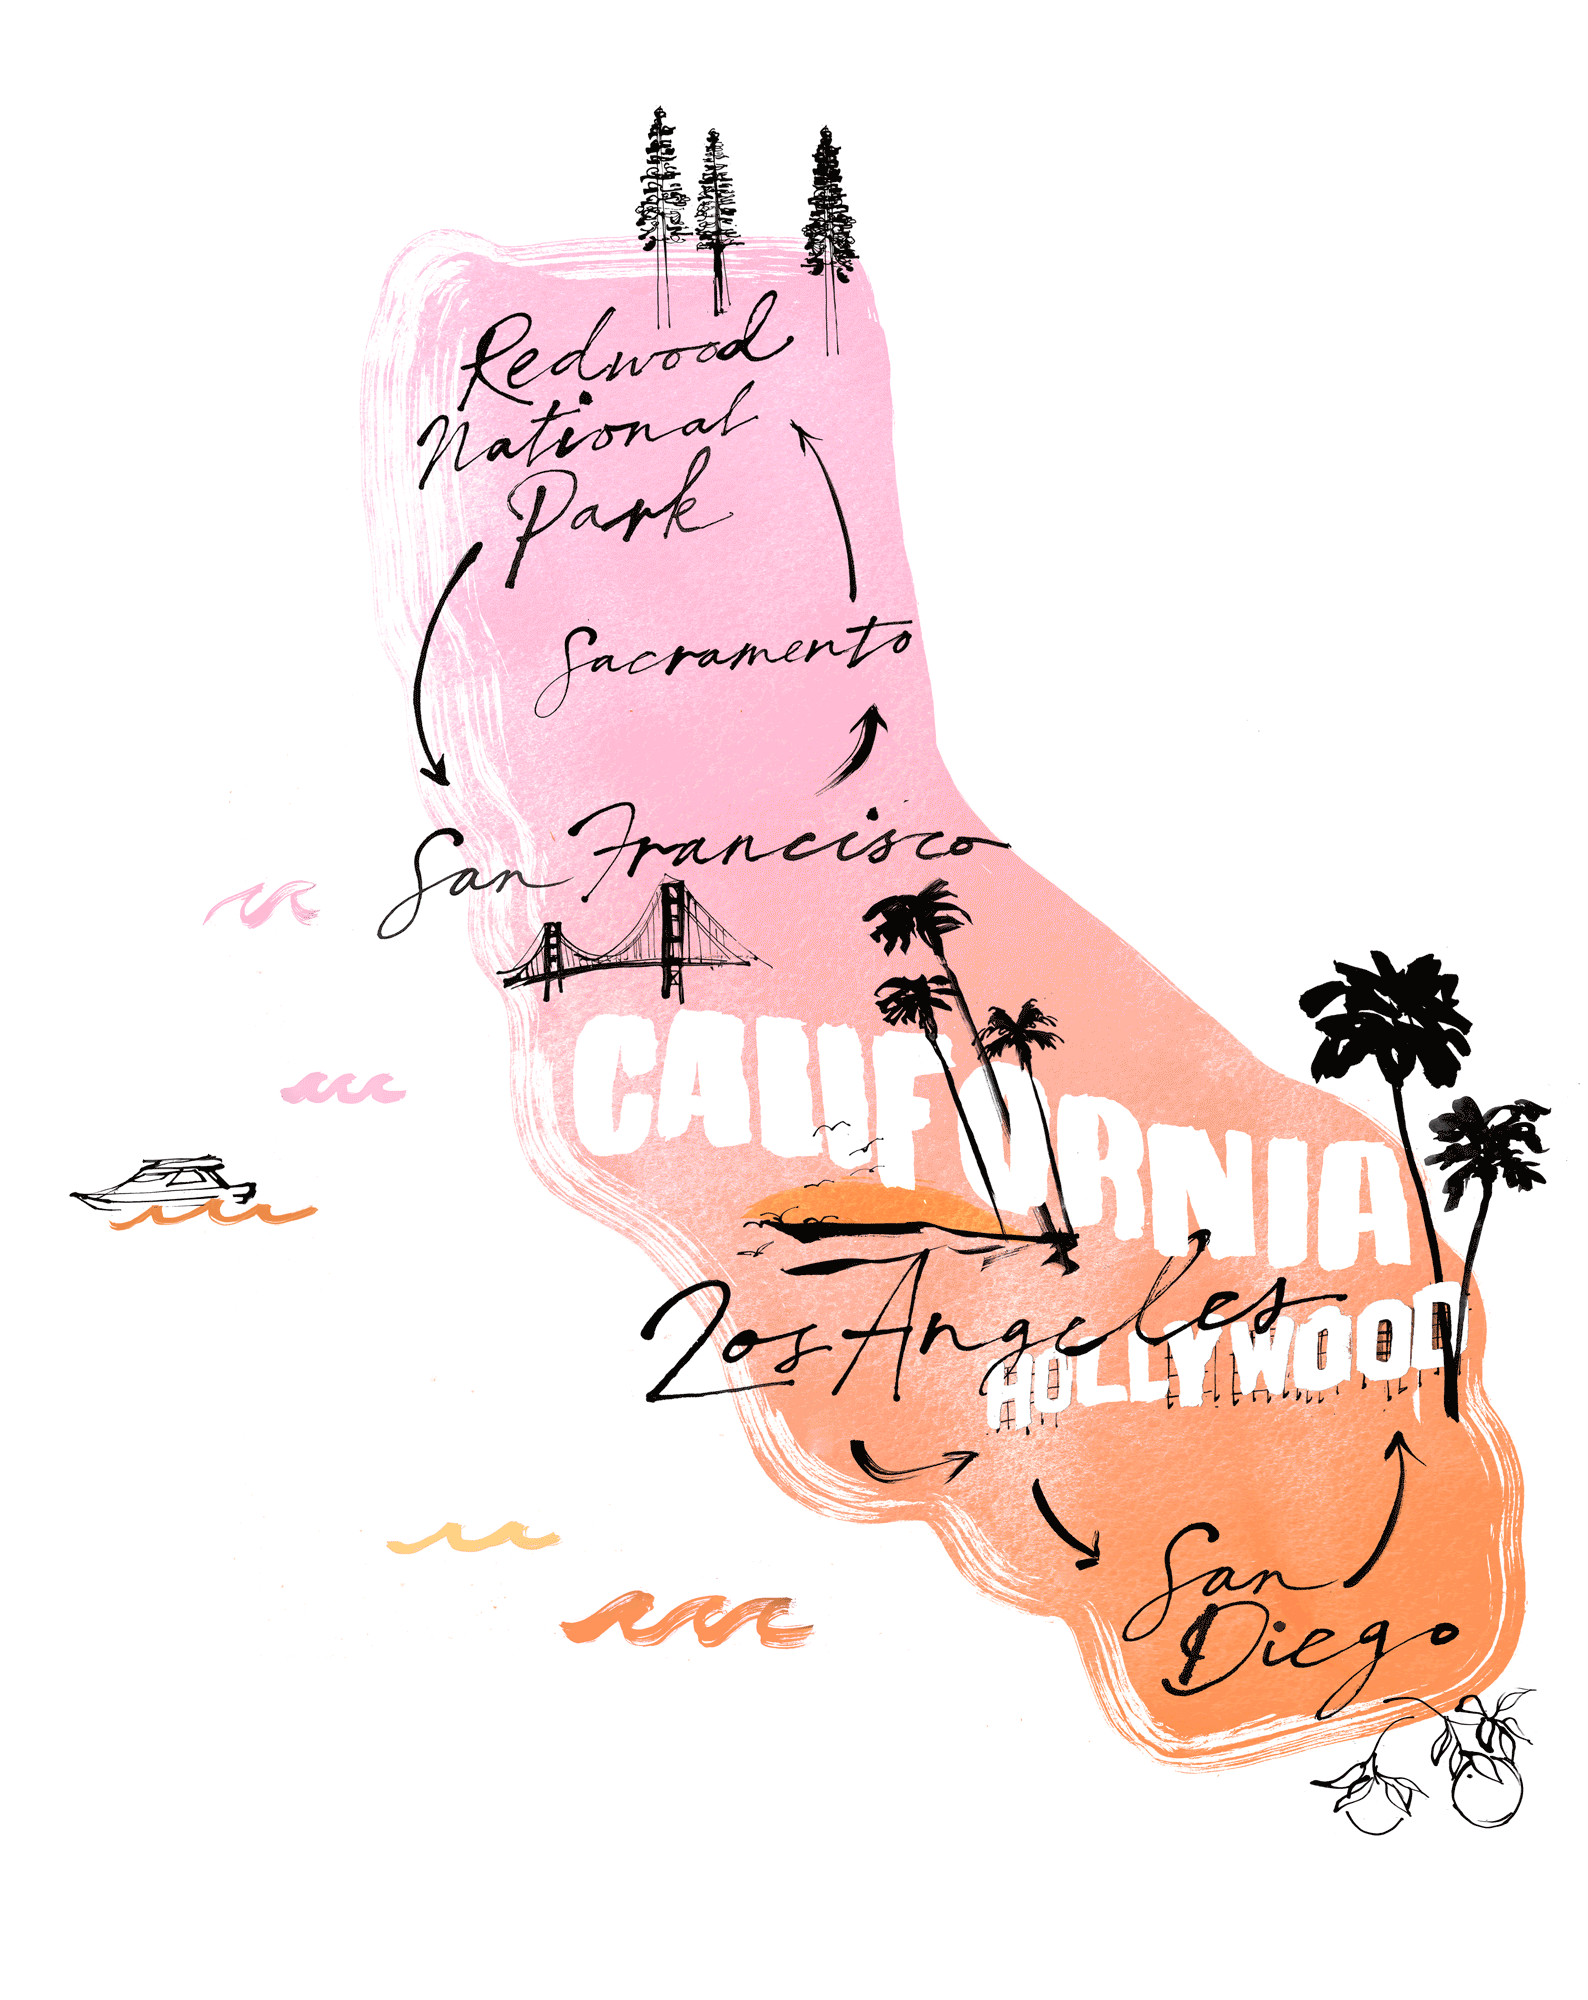 Caroline Tomlinson illustrated map of California. Travel inspired Illustrated map of the state of sunshine state of California Incorporating my inky hand written lettering, and drawings of landmarks and areas of interest.